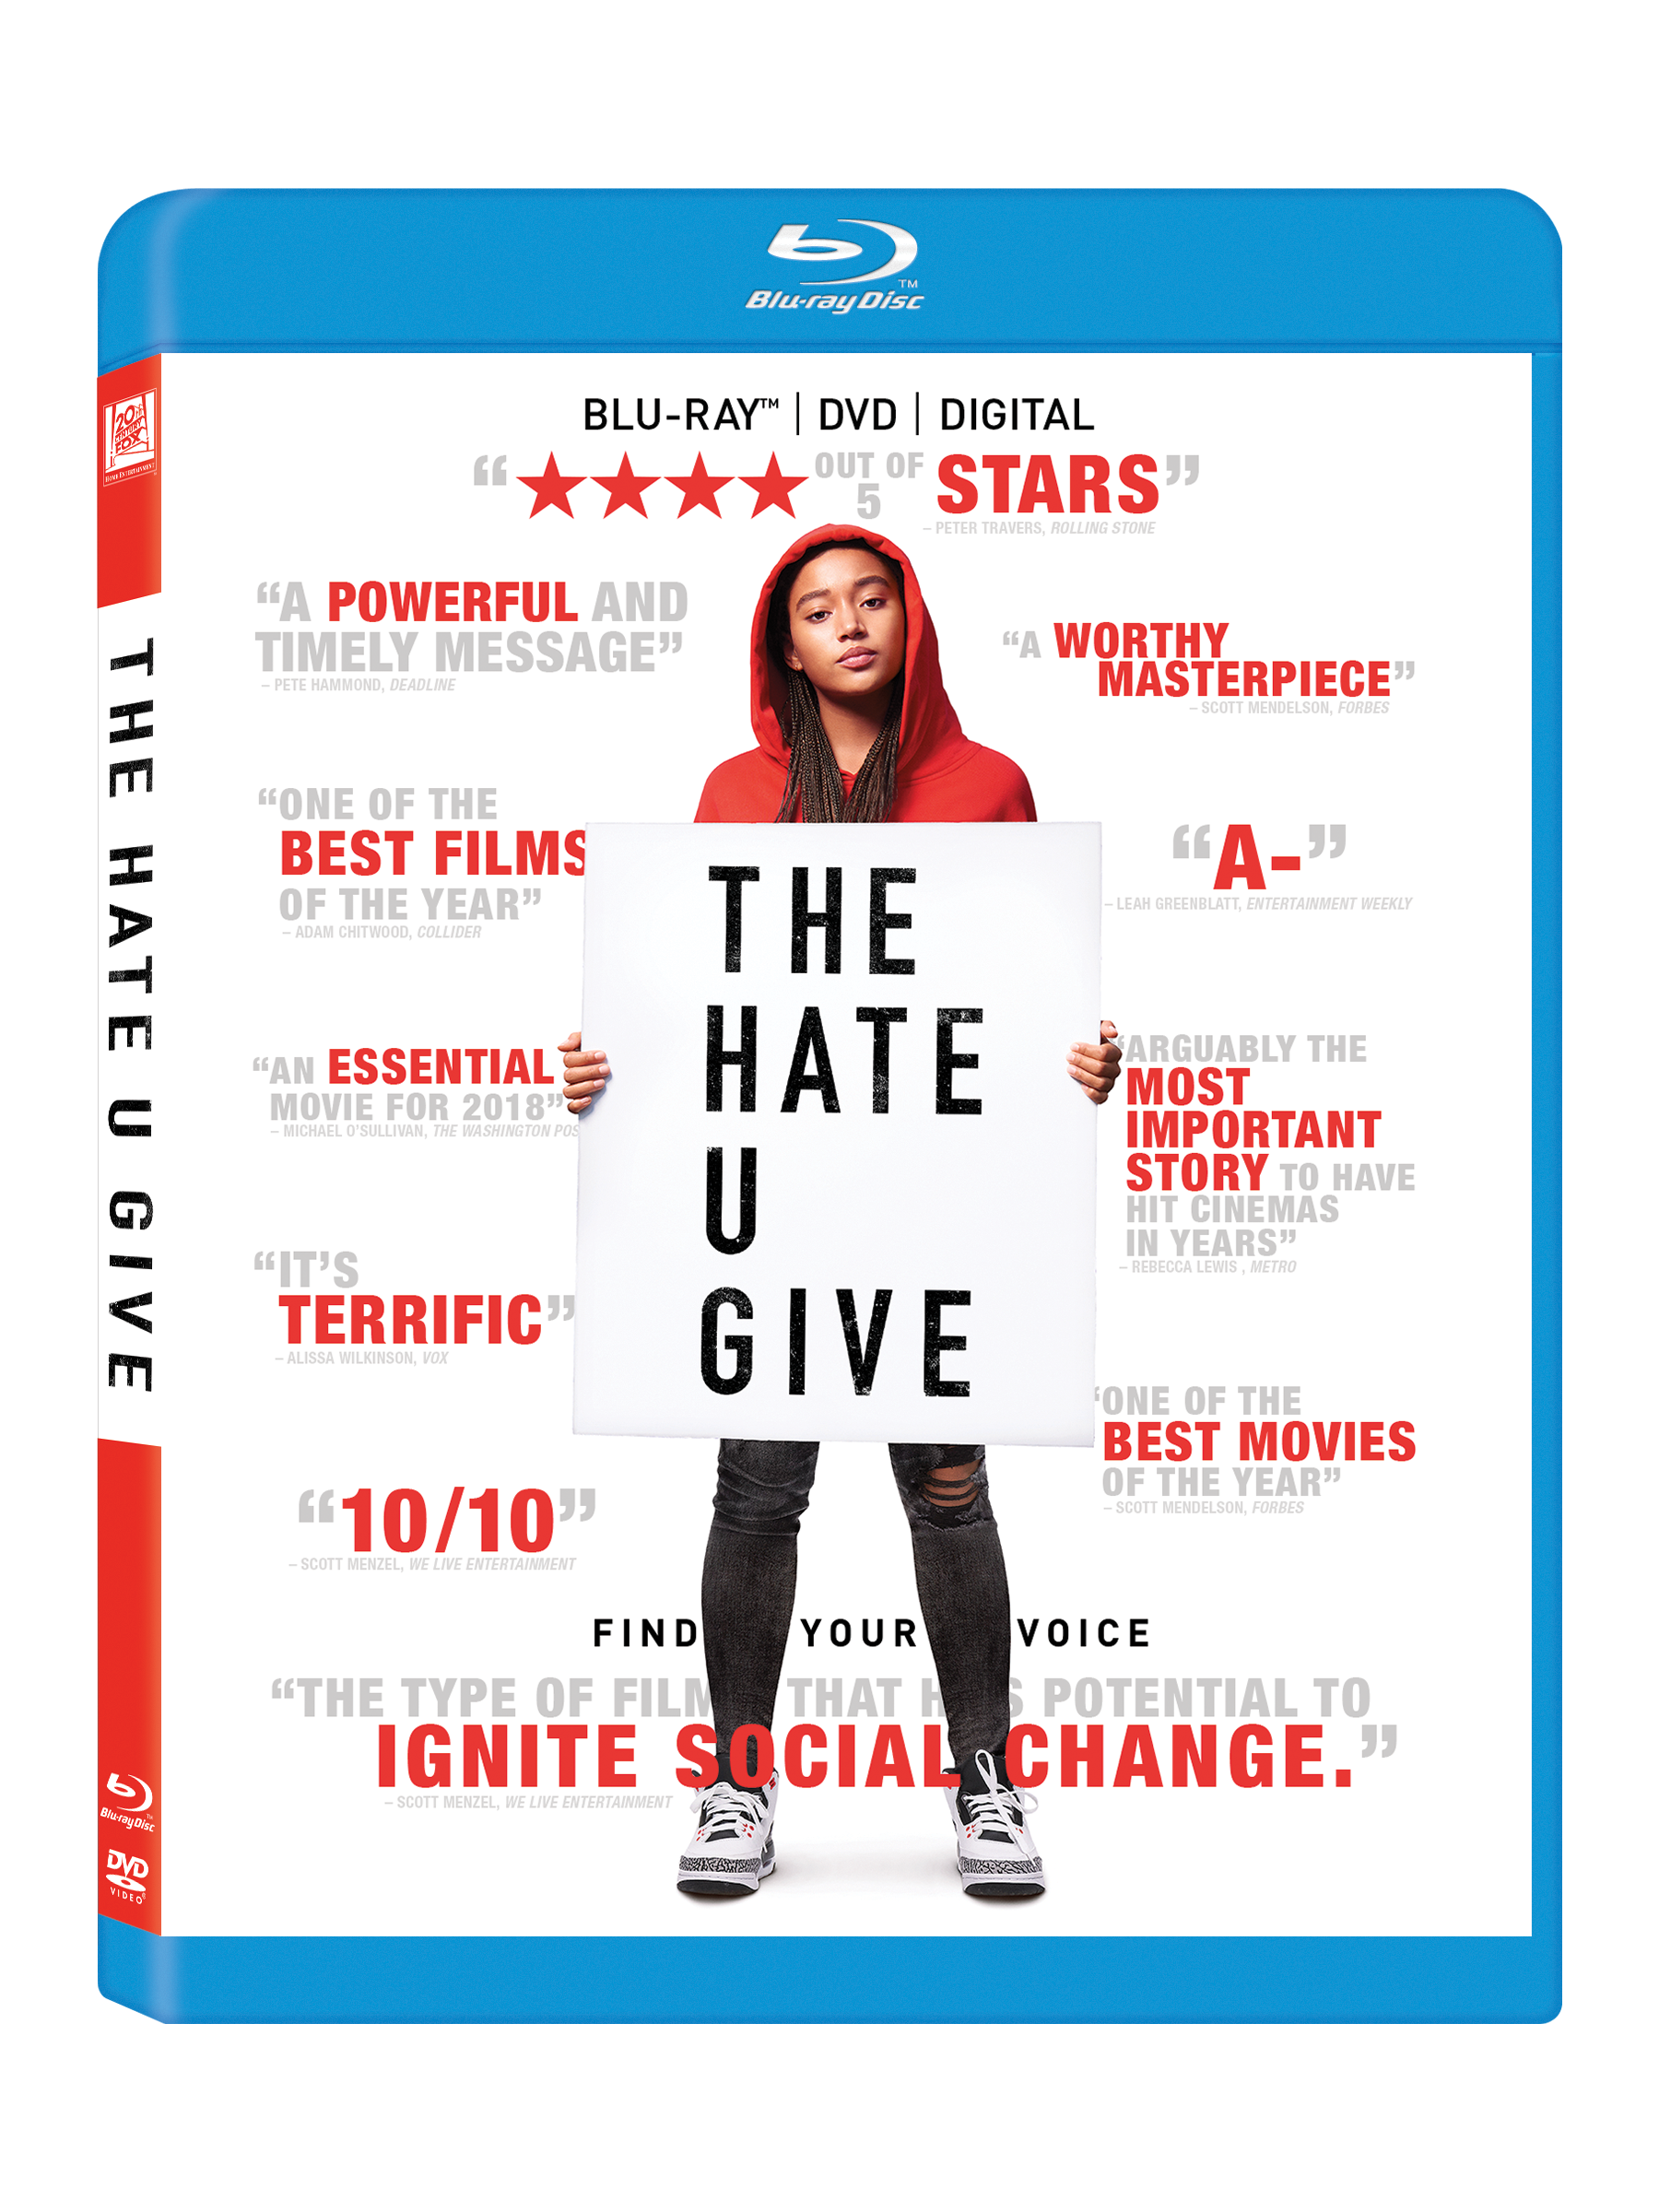 The Hate U Give Blu-Ray Combo Pack cover (20th Century Fox Home Entertainment)